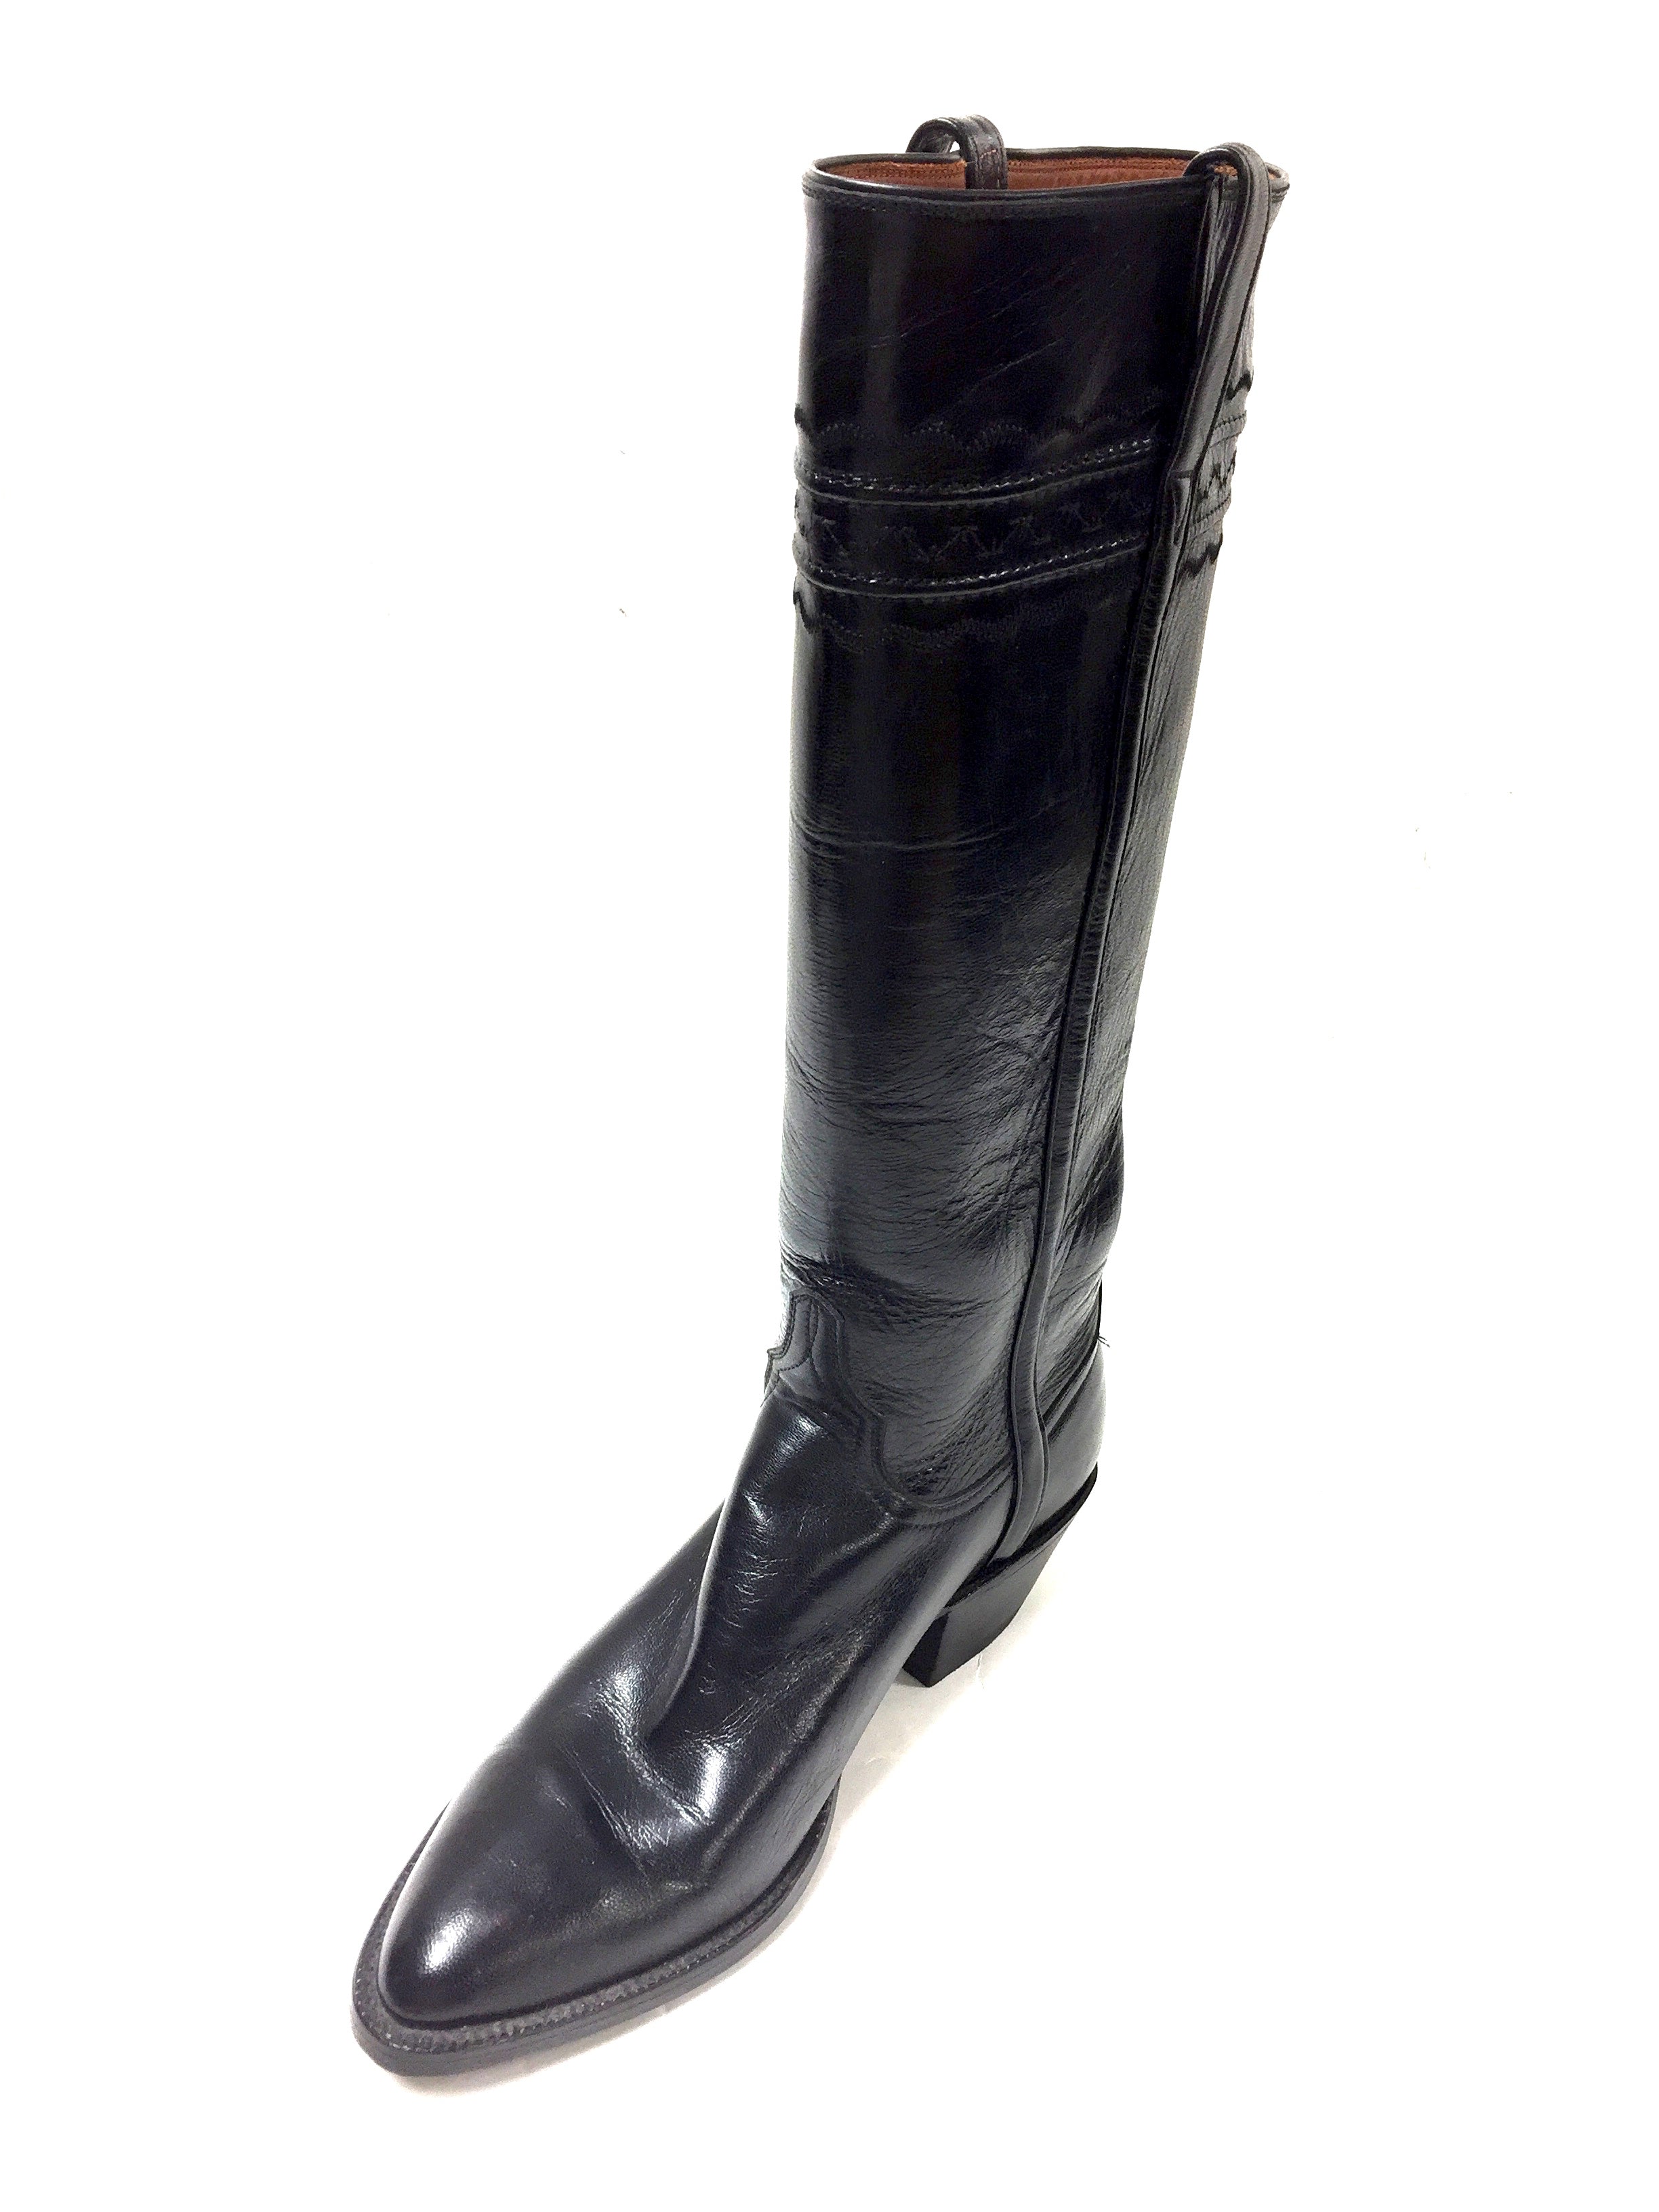 womens black leather boots size 8